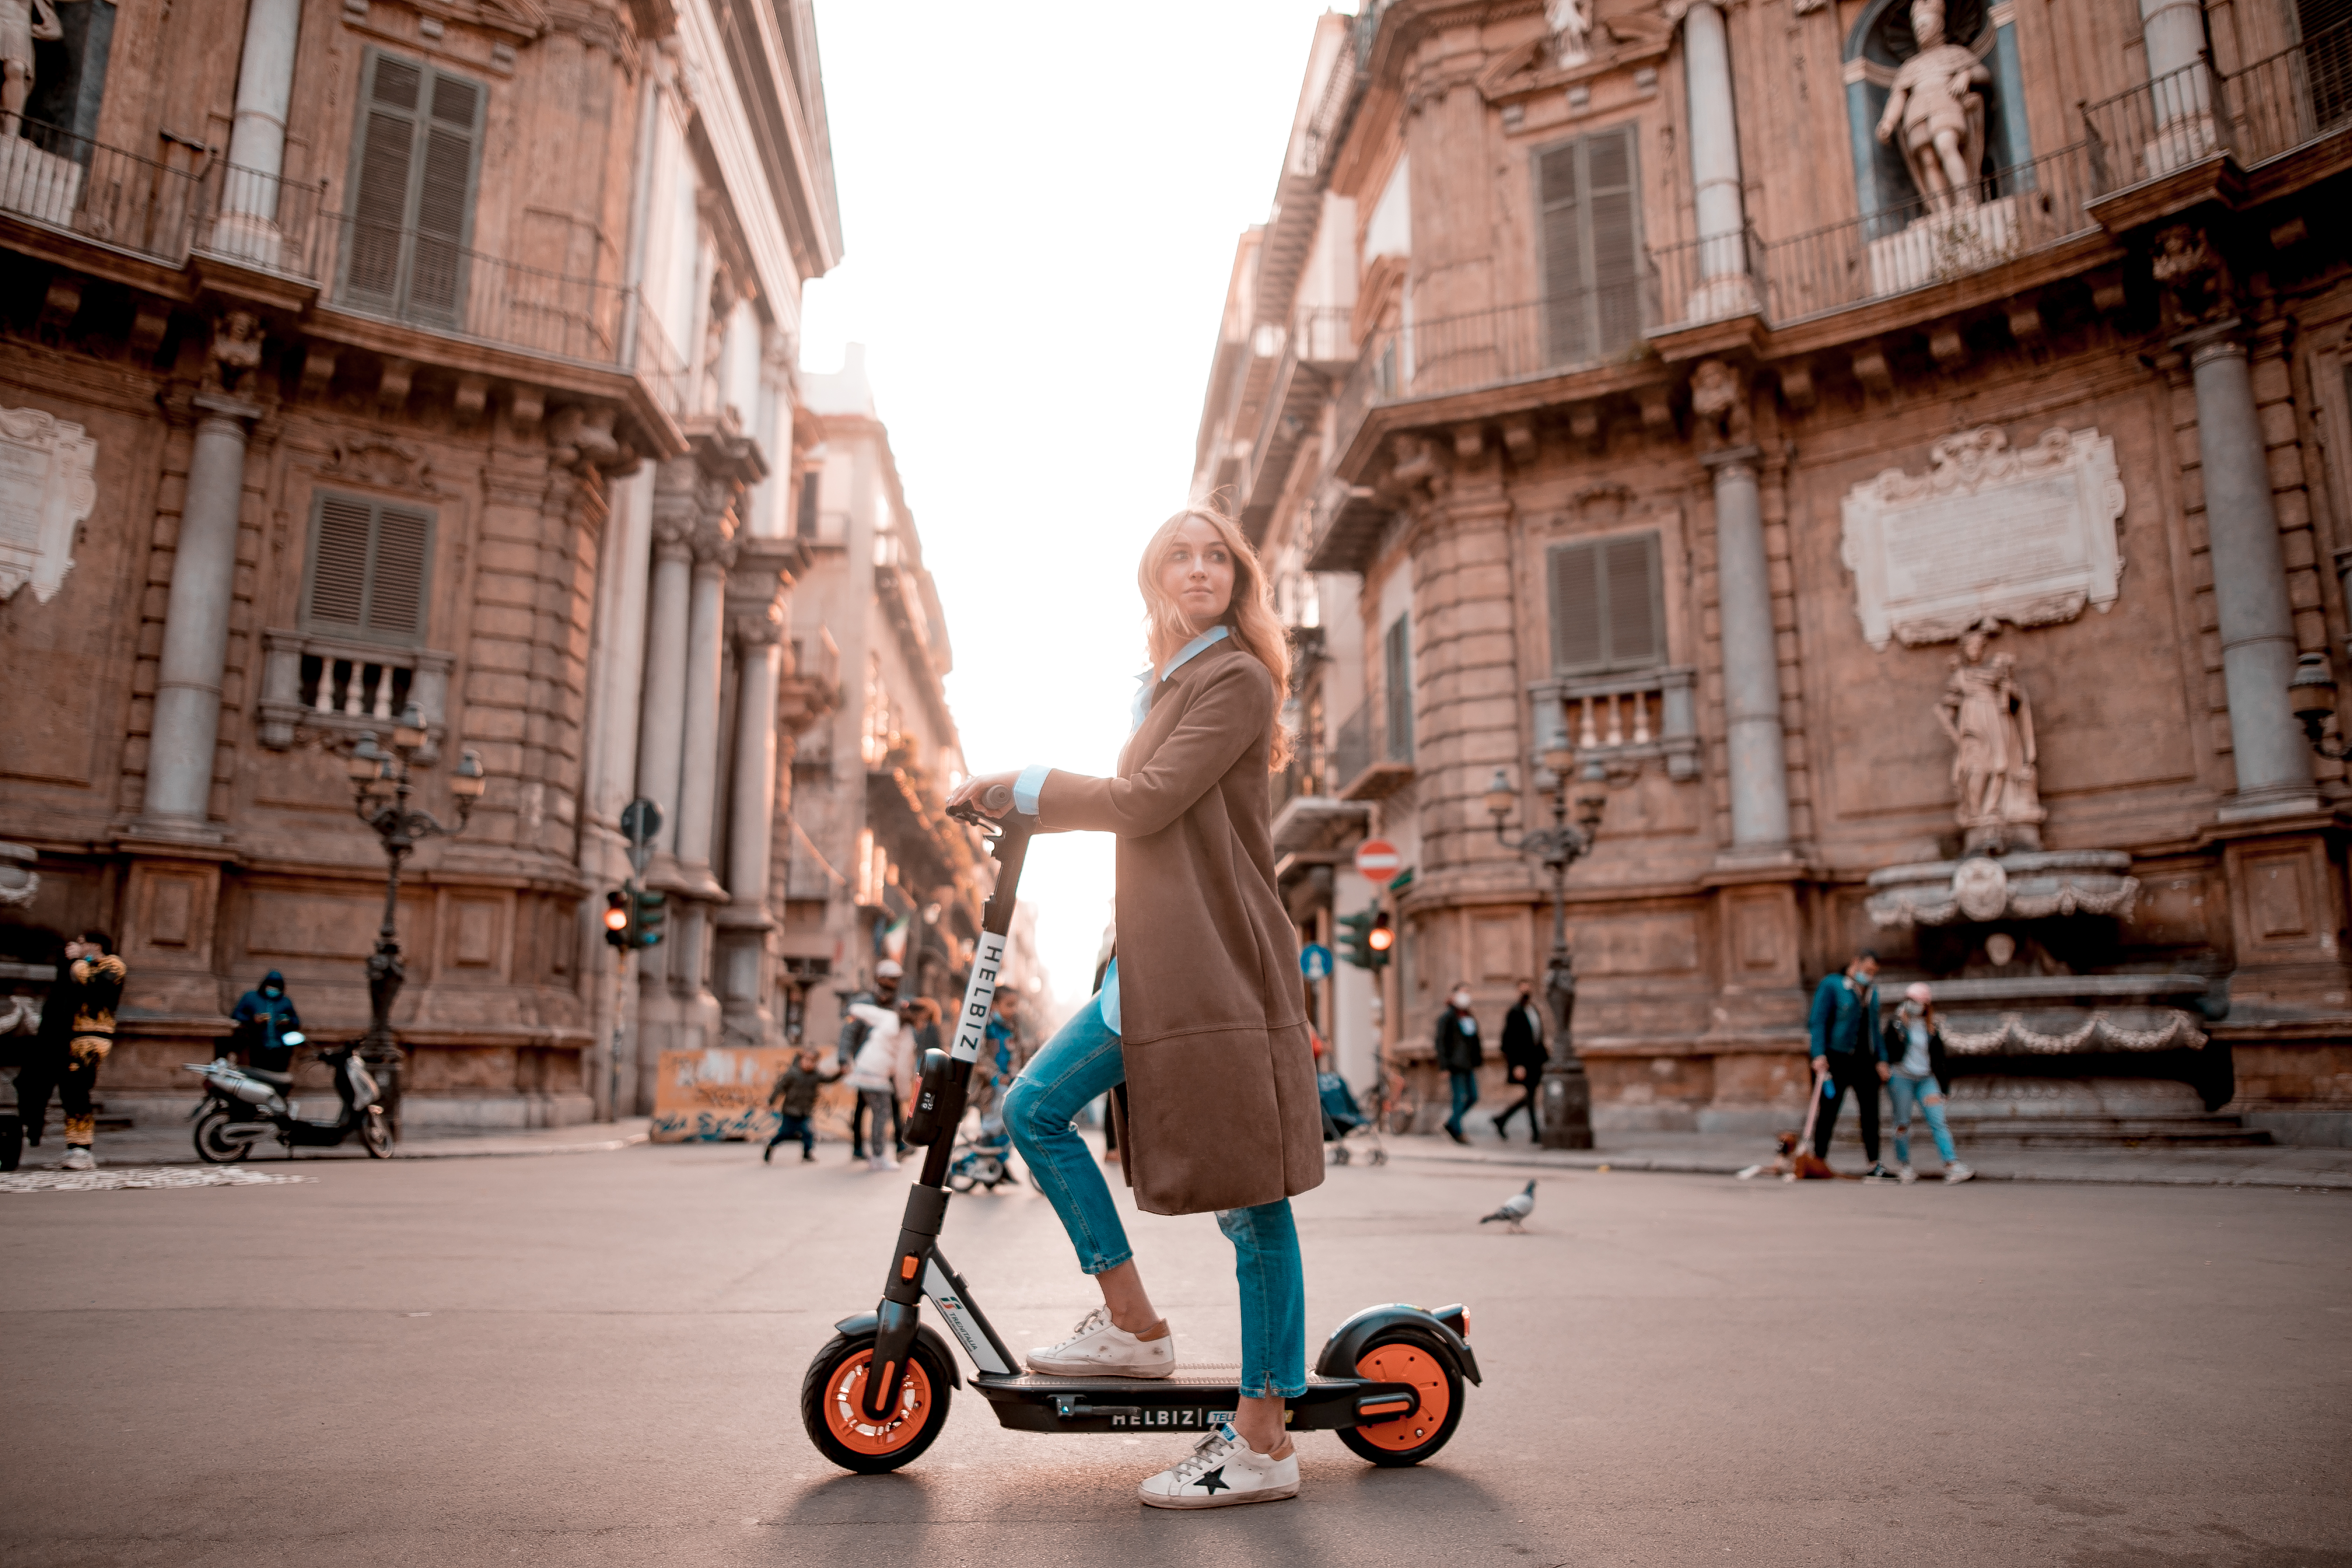 psykologisk Astrolabe Sanctuary Helbiz, An Italian Micro-mobility Leader, Launches Operations in Palermo to  Offer E-Scooter Services in Sicily | Business Wire